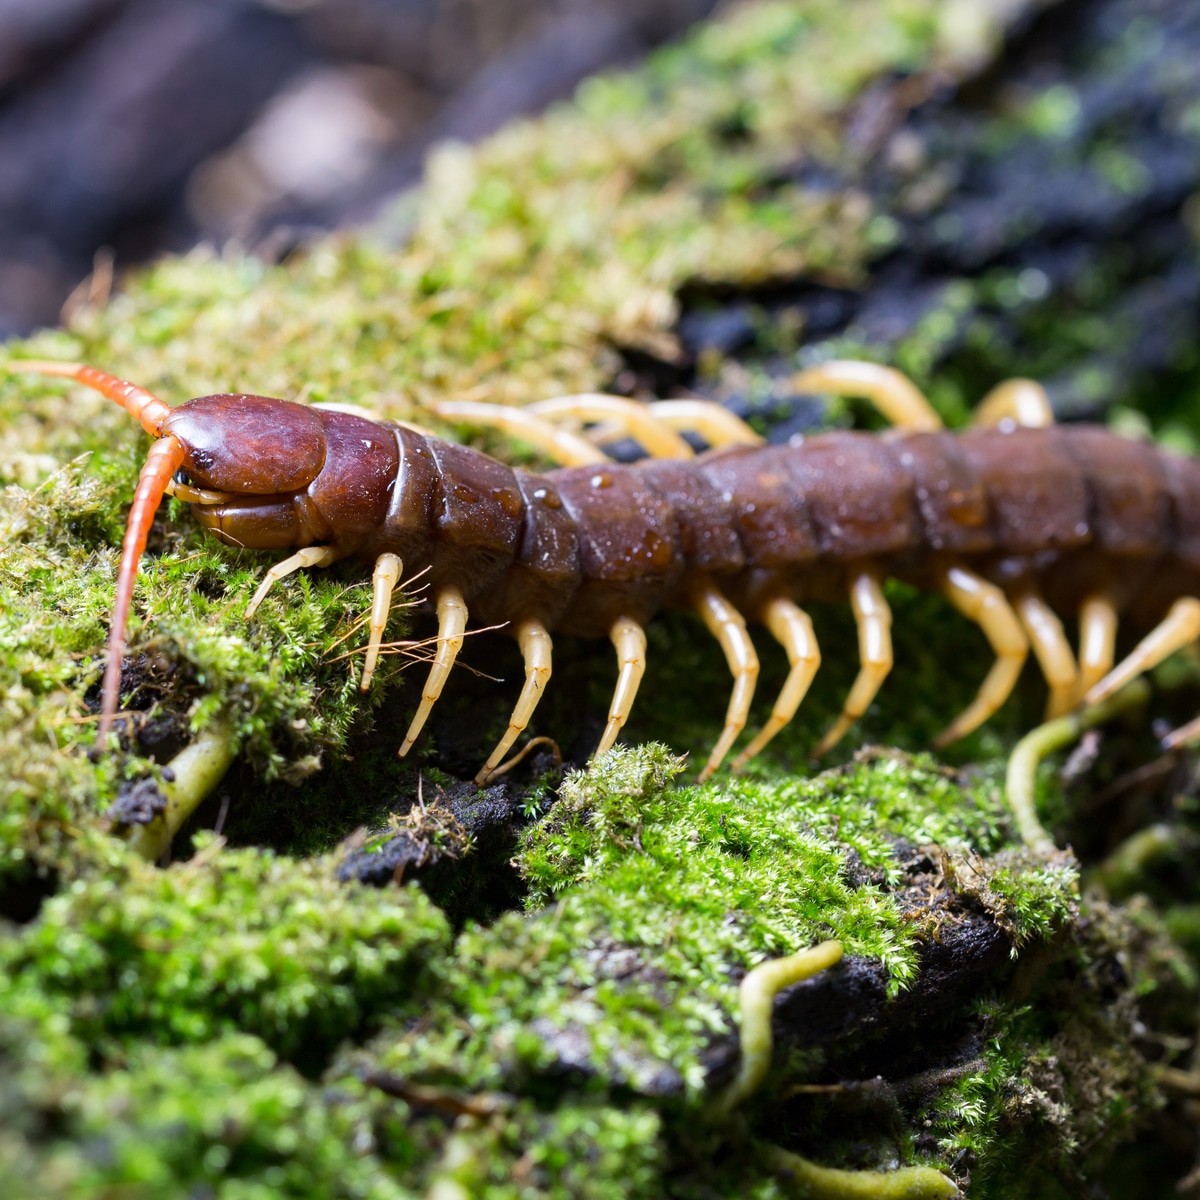 Centipede roaming on a mossy tree.